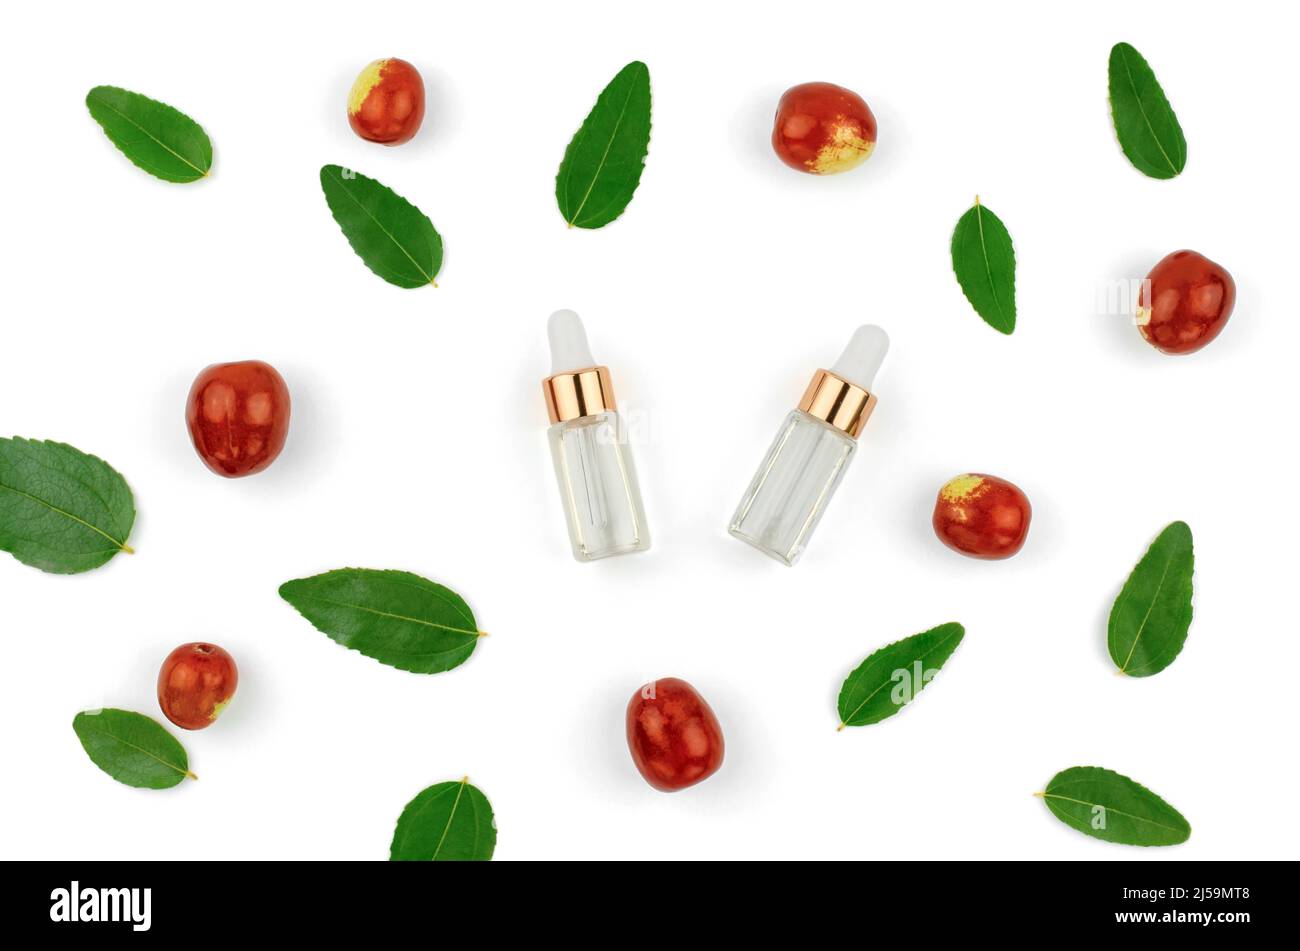 Chinese date fruit and oil. Jojoba oil in a transparent bottle with a dropper and fresh jojoba fruit on a white background. Stock Photo